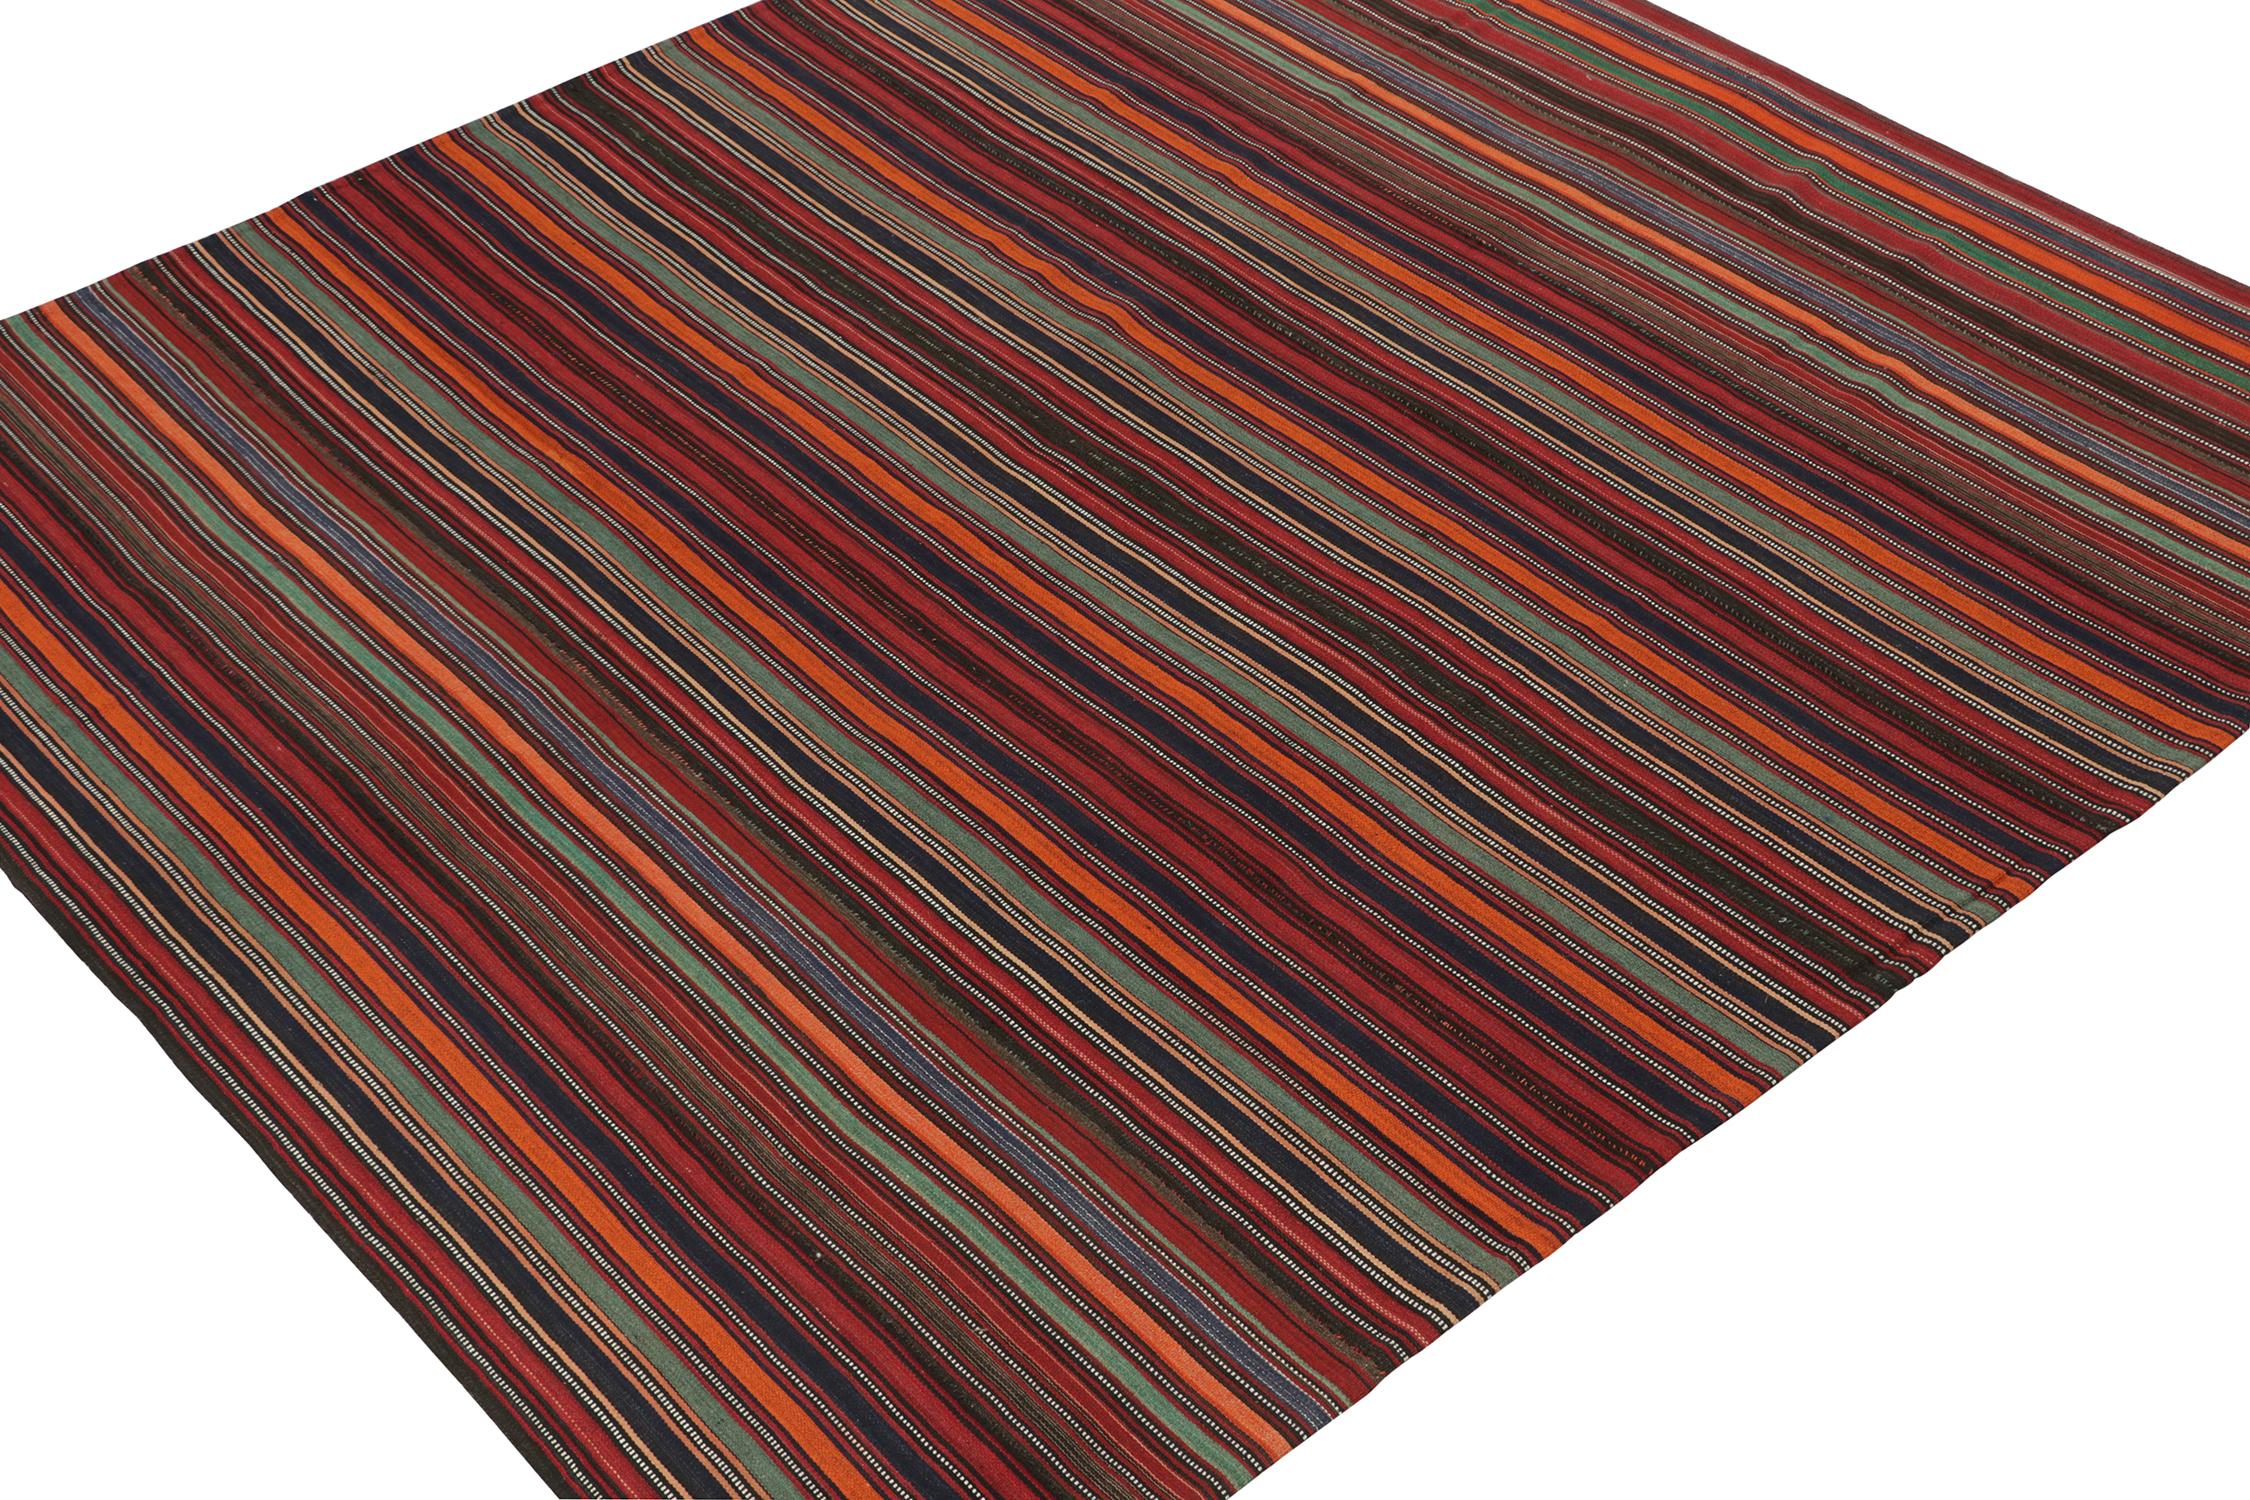 This vintage 8x8 Persian kilim is a Jajim style curation, handwoven in wool circa 1950-1960. 

Further on the Design:

This rich design prefers red, orange, blue, black in a gorgeous yet simple play of polychromatic stripes. Its natural sense of